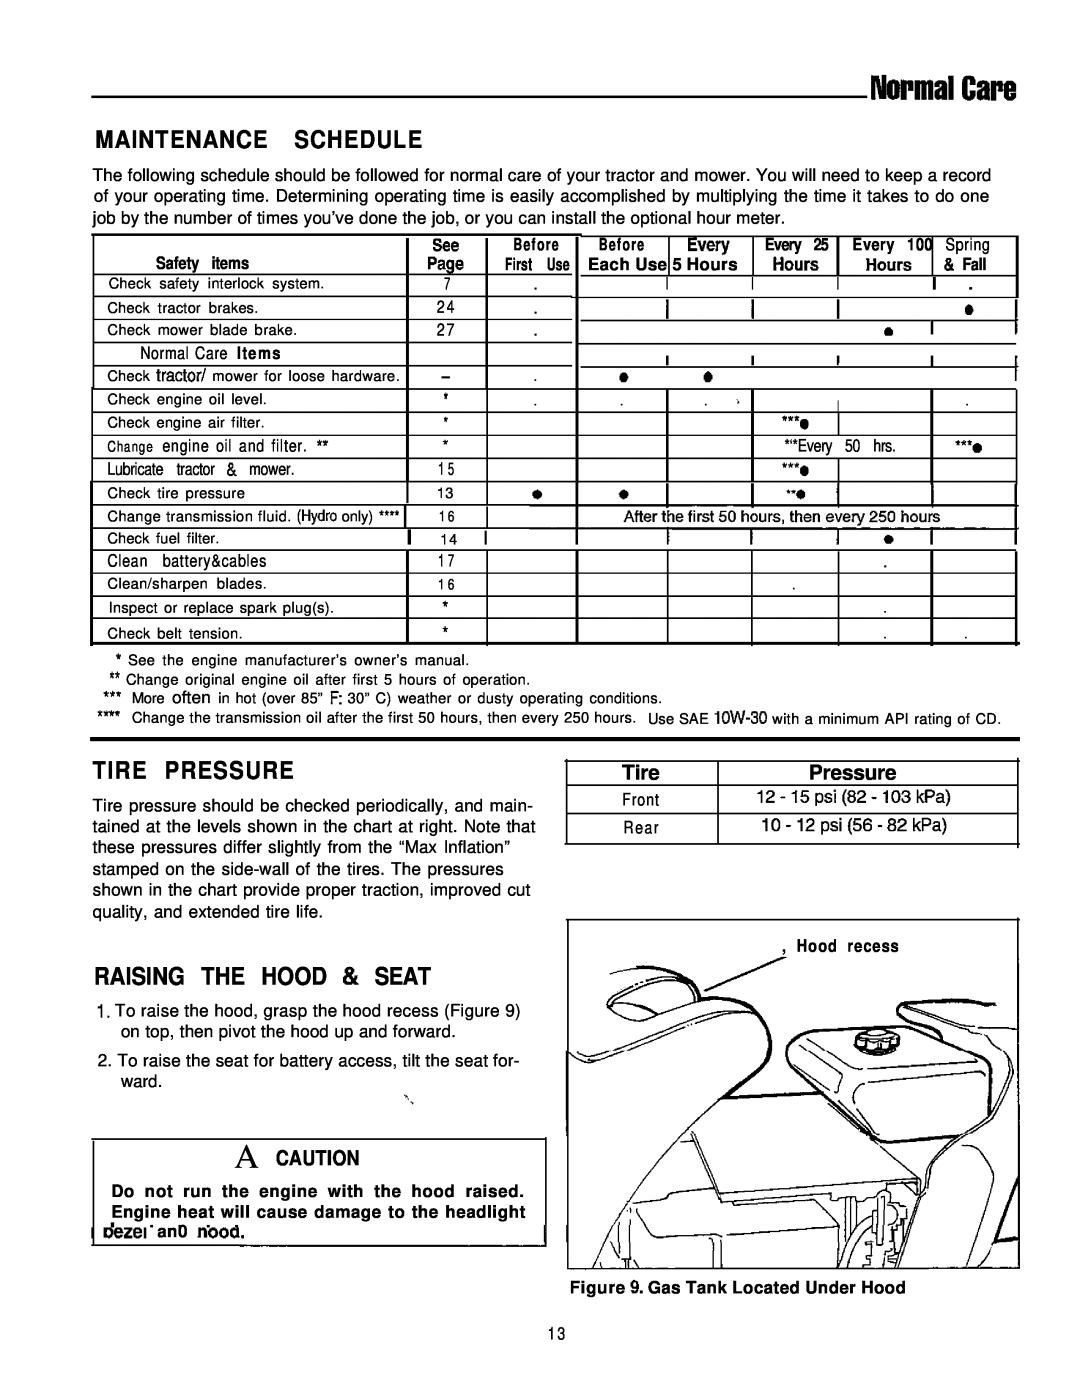 Simplicity 1693264 NormalCare, Maintenance Schedule, Tire Pressure, Raising The Hood & Seat, items, Before, EveI, Every 